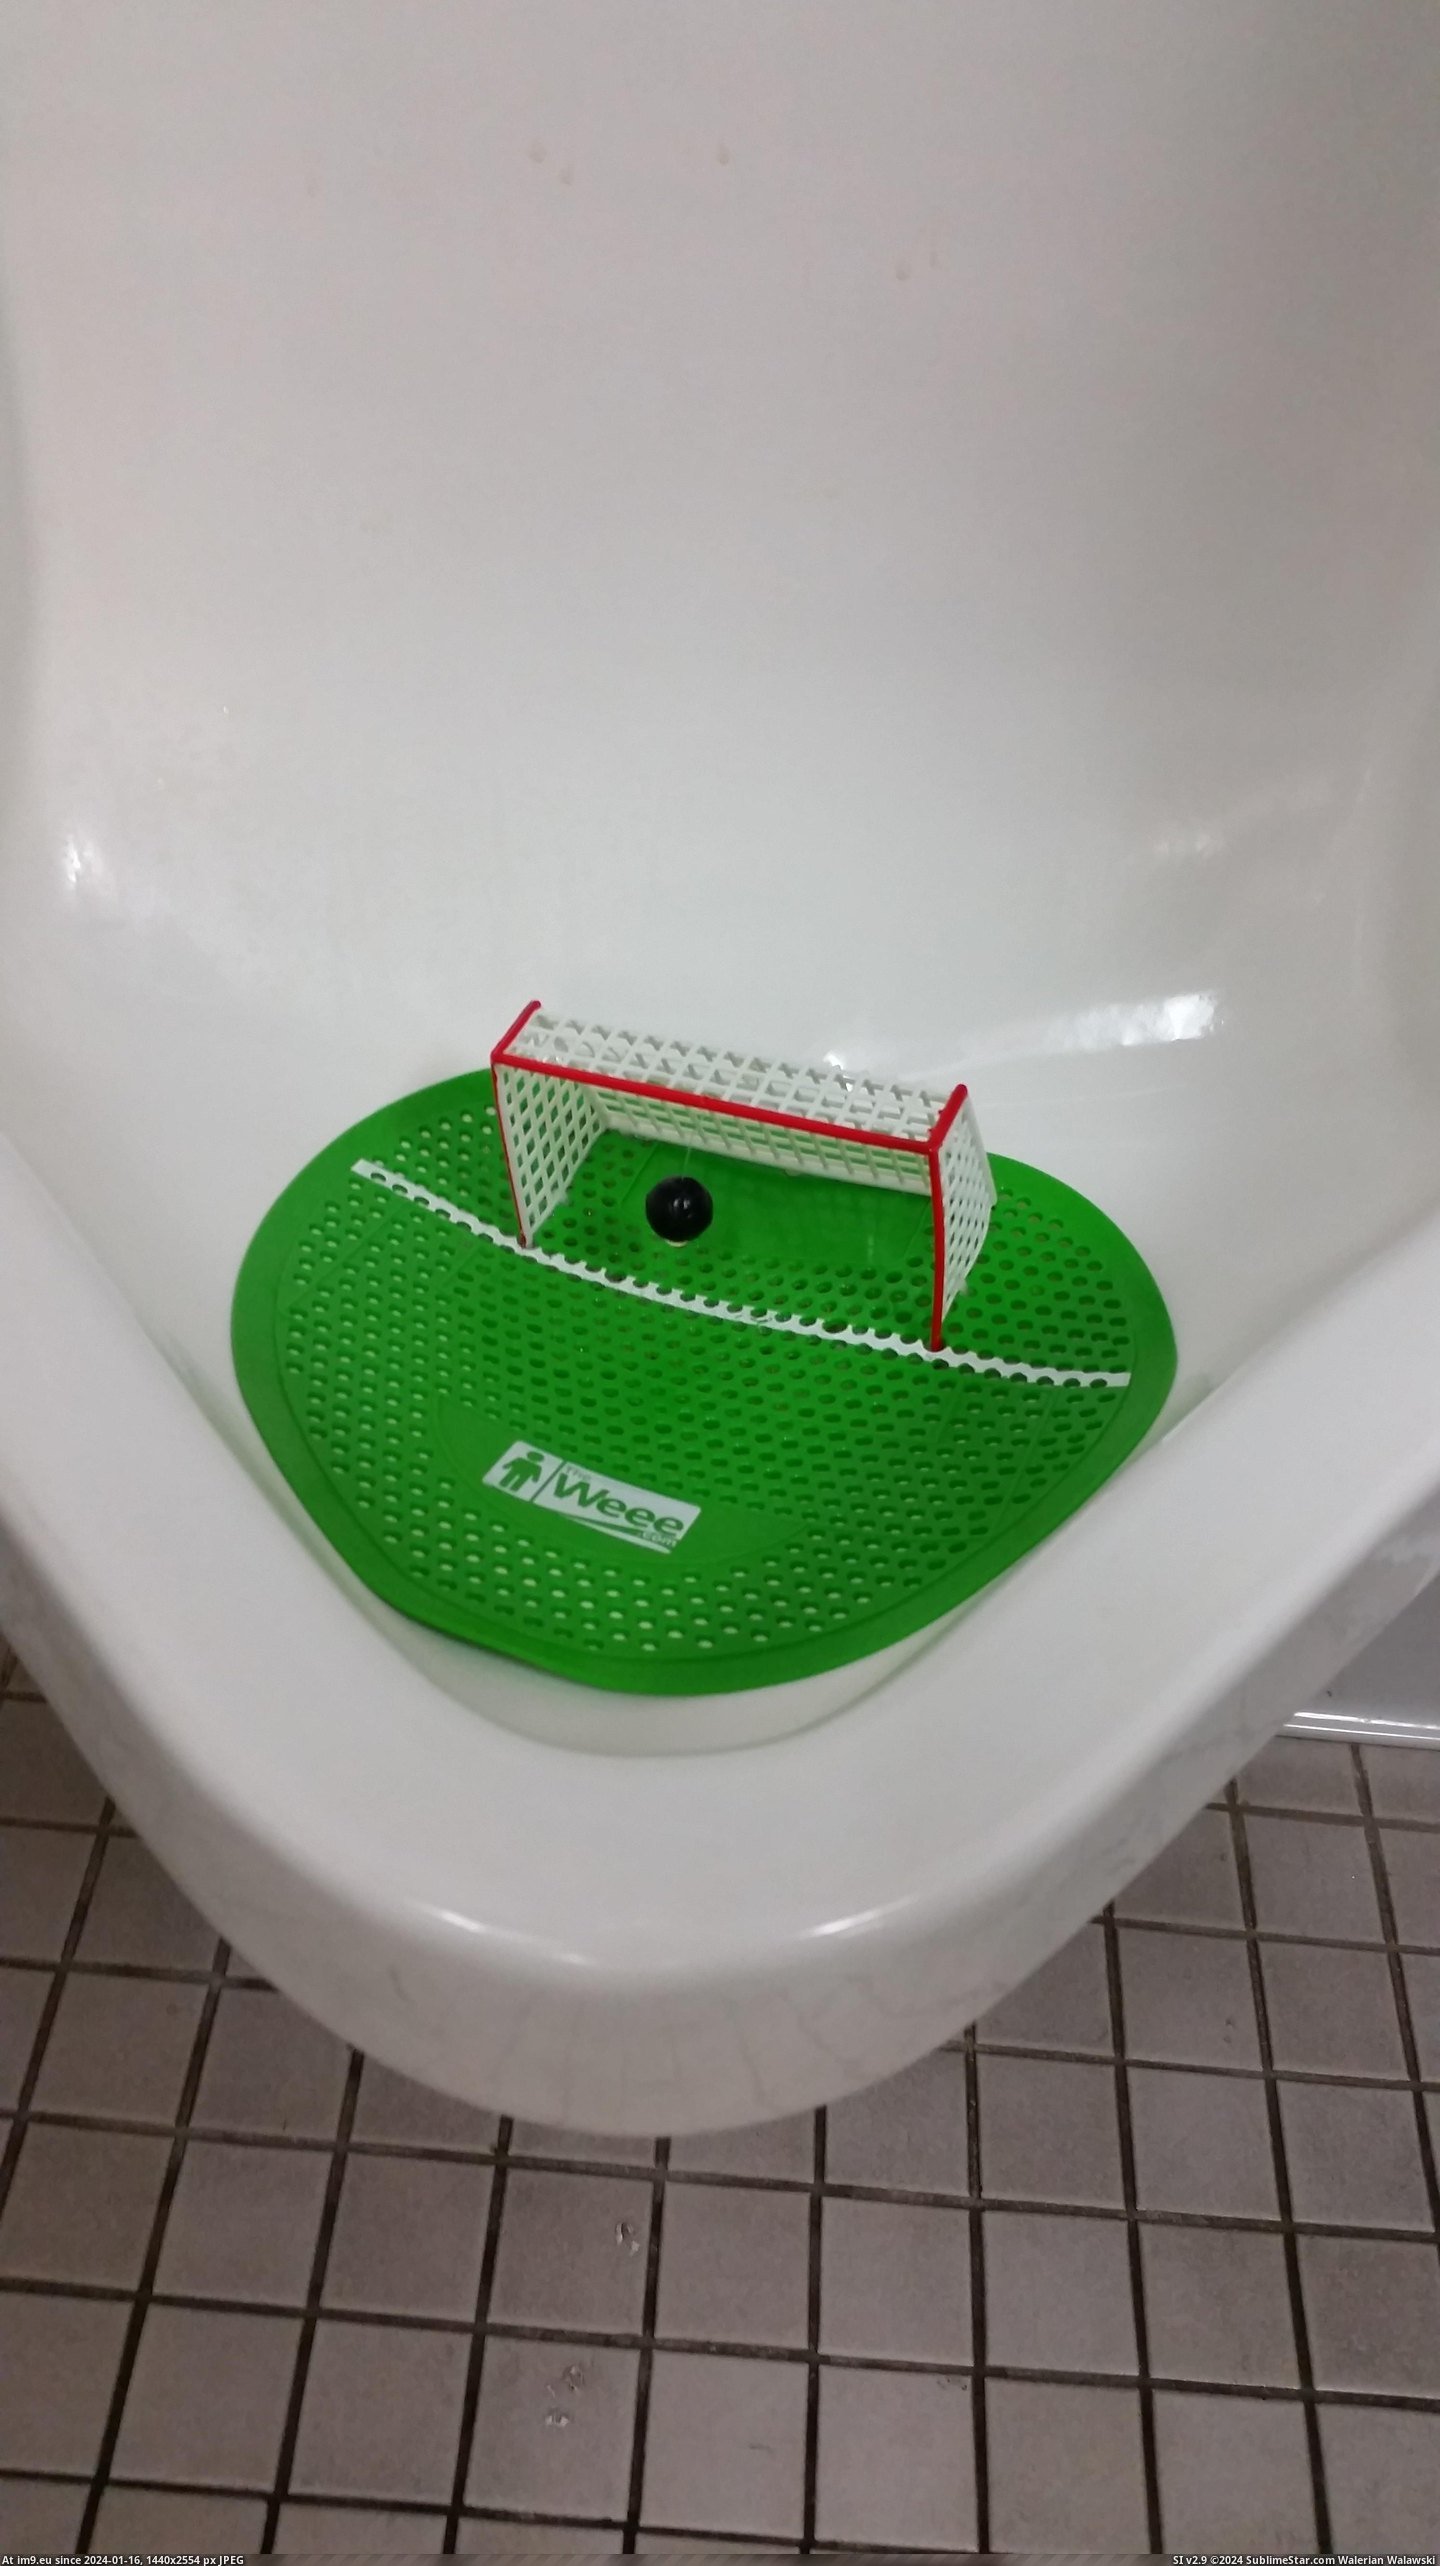 #City #Sports #Ball #Goals #Aim #Dangling #Soccer #Complex #Urinals [Mildlyinteresting] The sports complex in my city has little soccer goals in their urinals with a dangling ball you can aim at. Pic. (Bild von album My r/MILDLYINTERESTING favs))